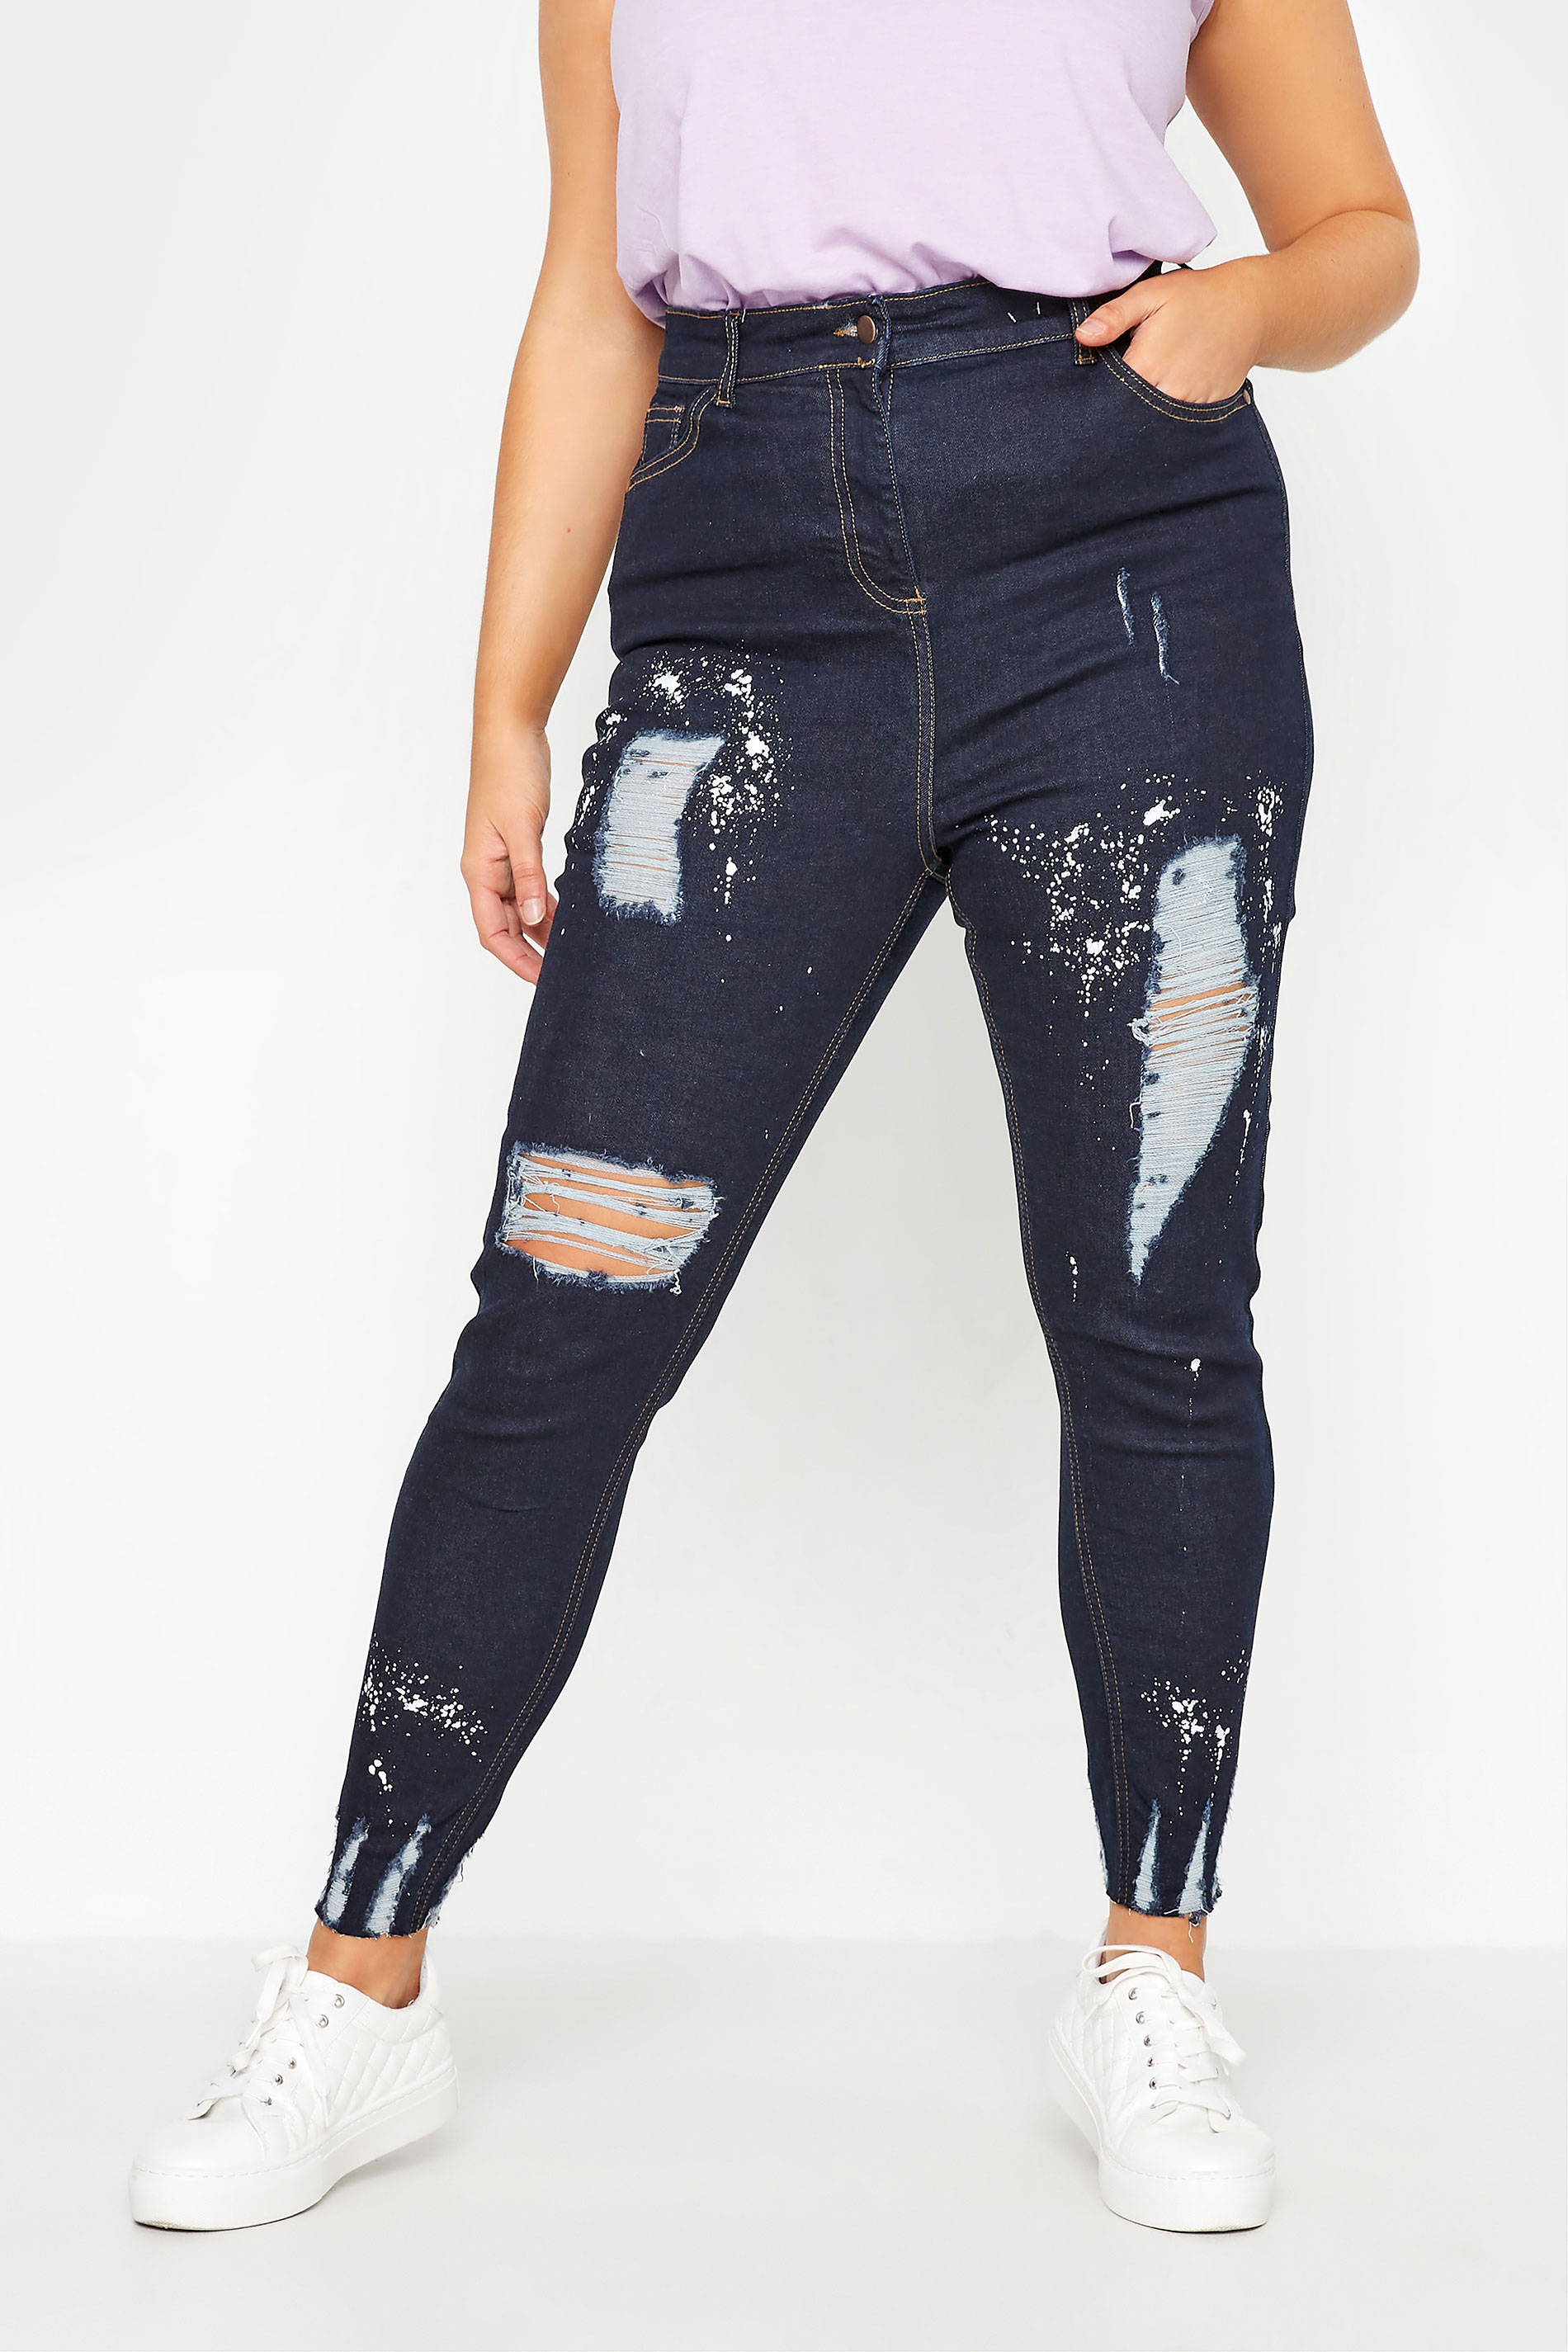 Blue Ripped Paint Skinny AVA Jeans 1